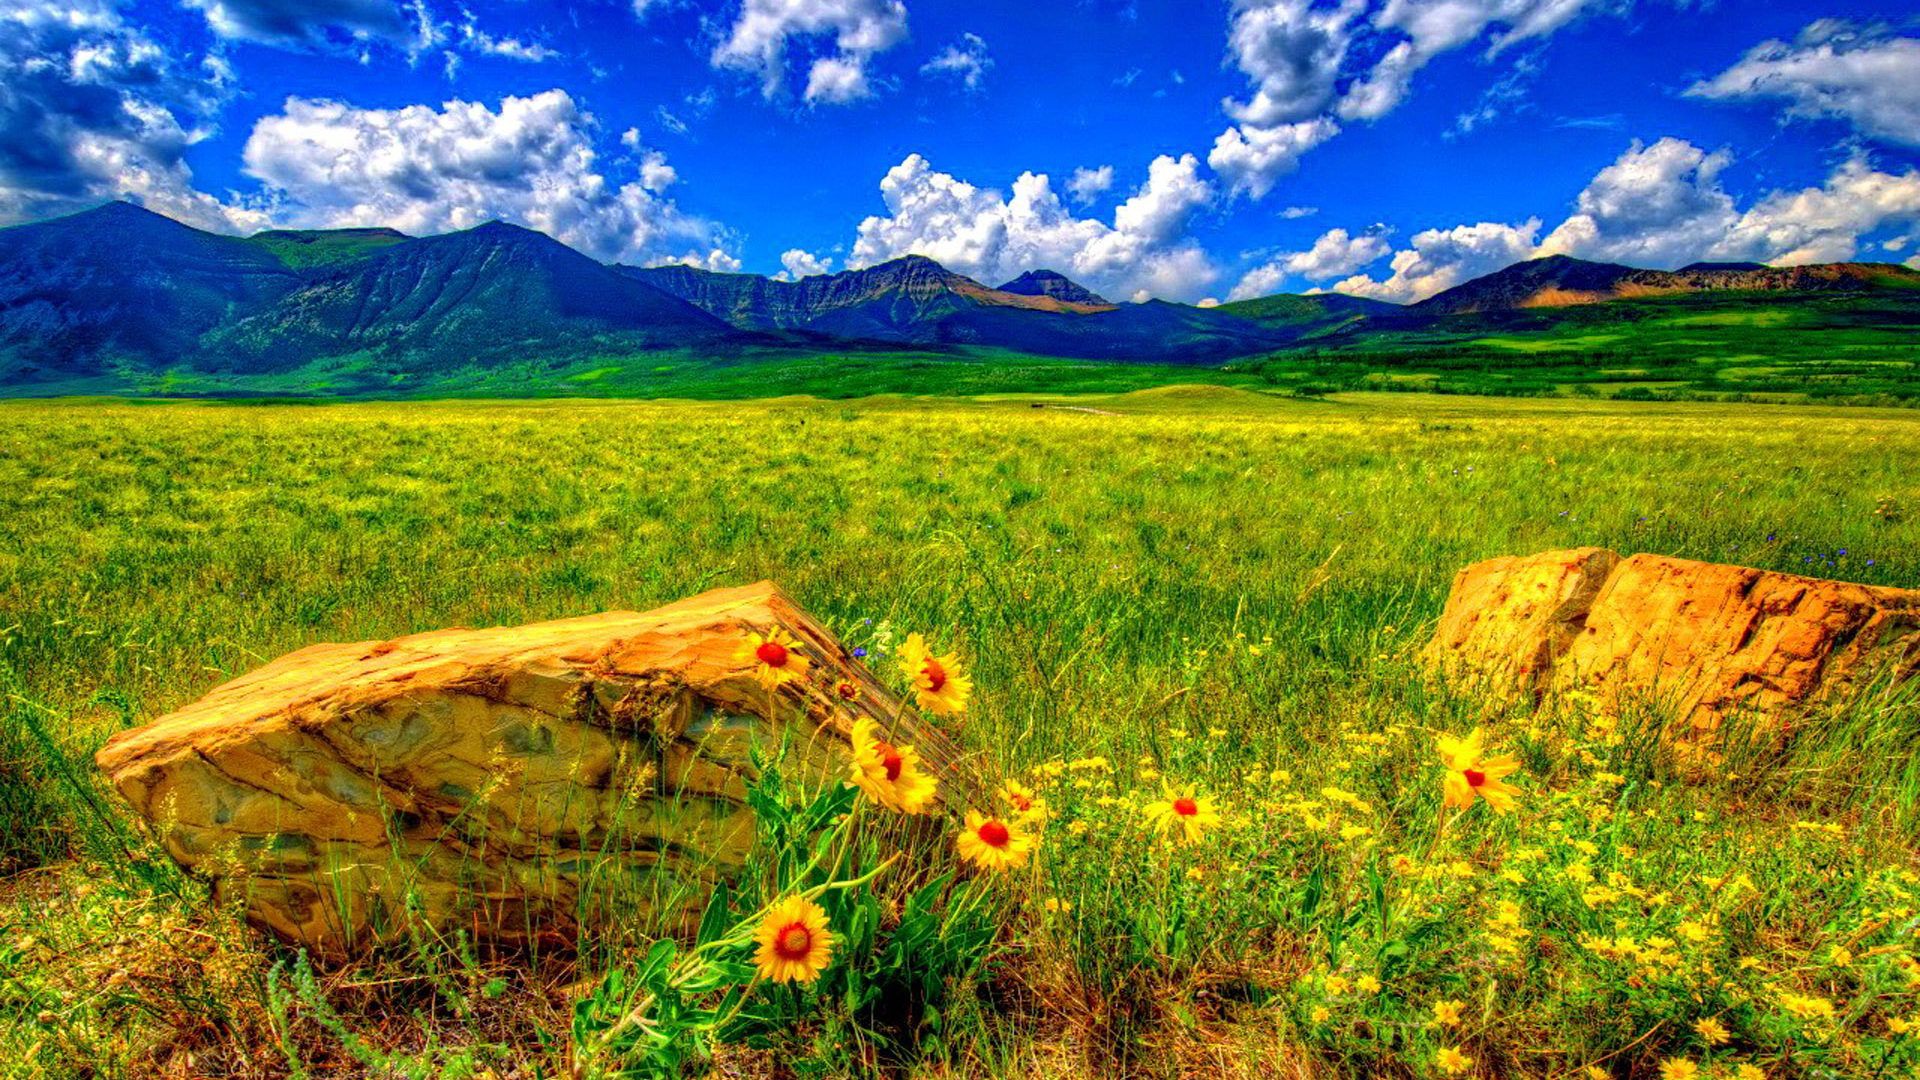 Summer Wild Flowers Stones Meadow Mountain Blue Sky With White